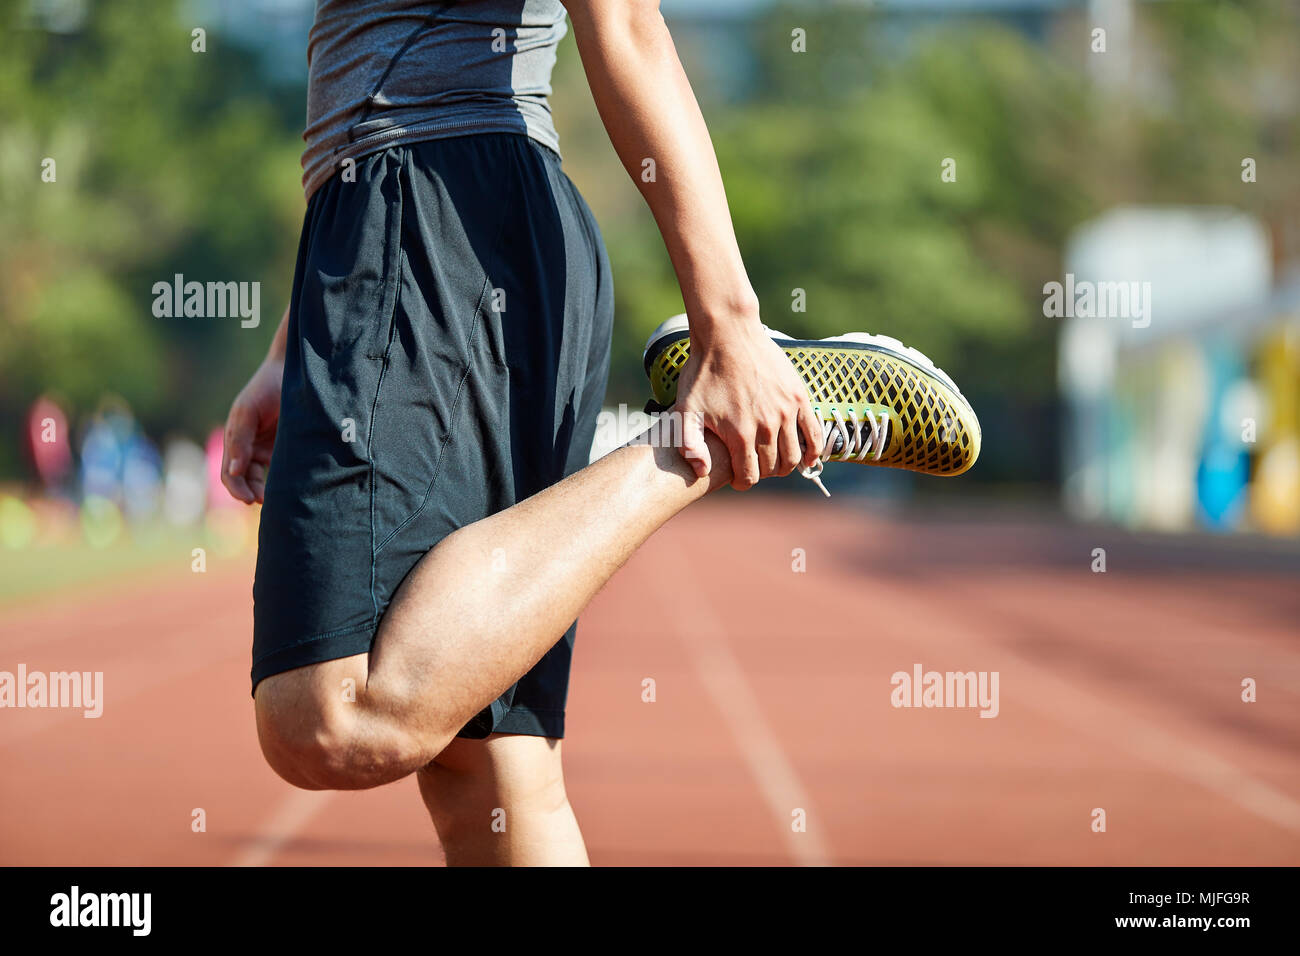 young asian man male athlete warming up stretching legs on track. Stock Photo